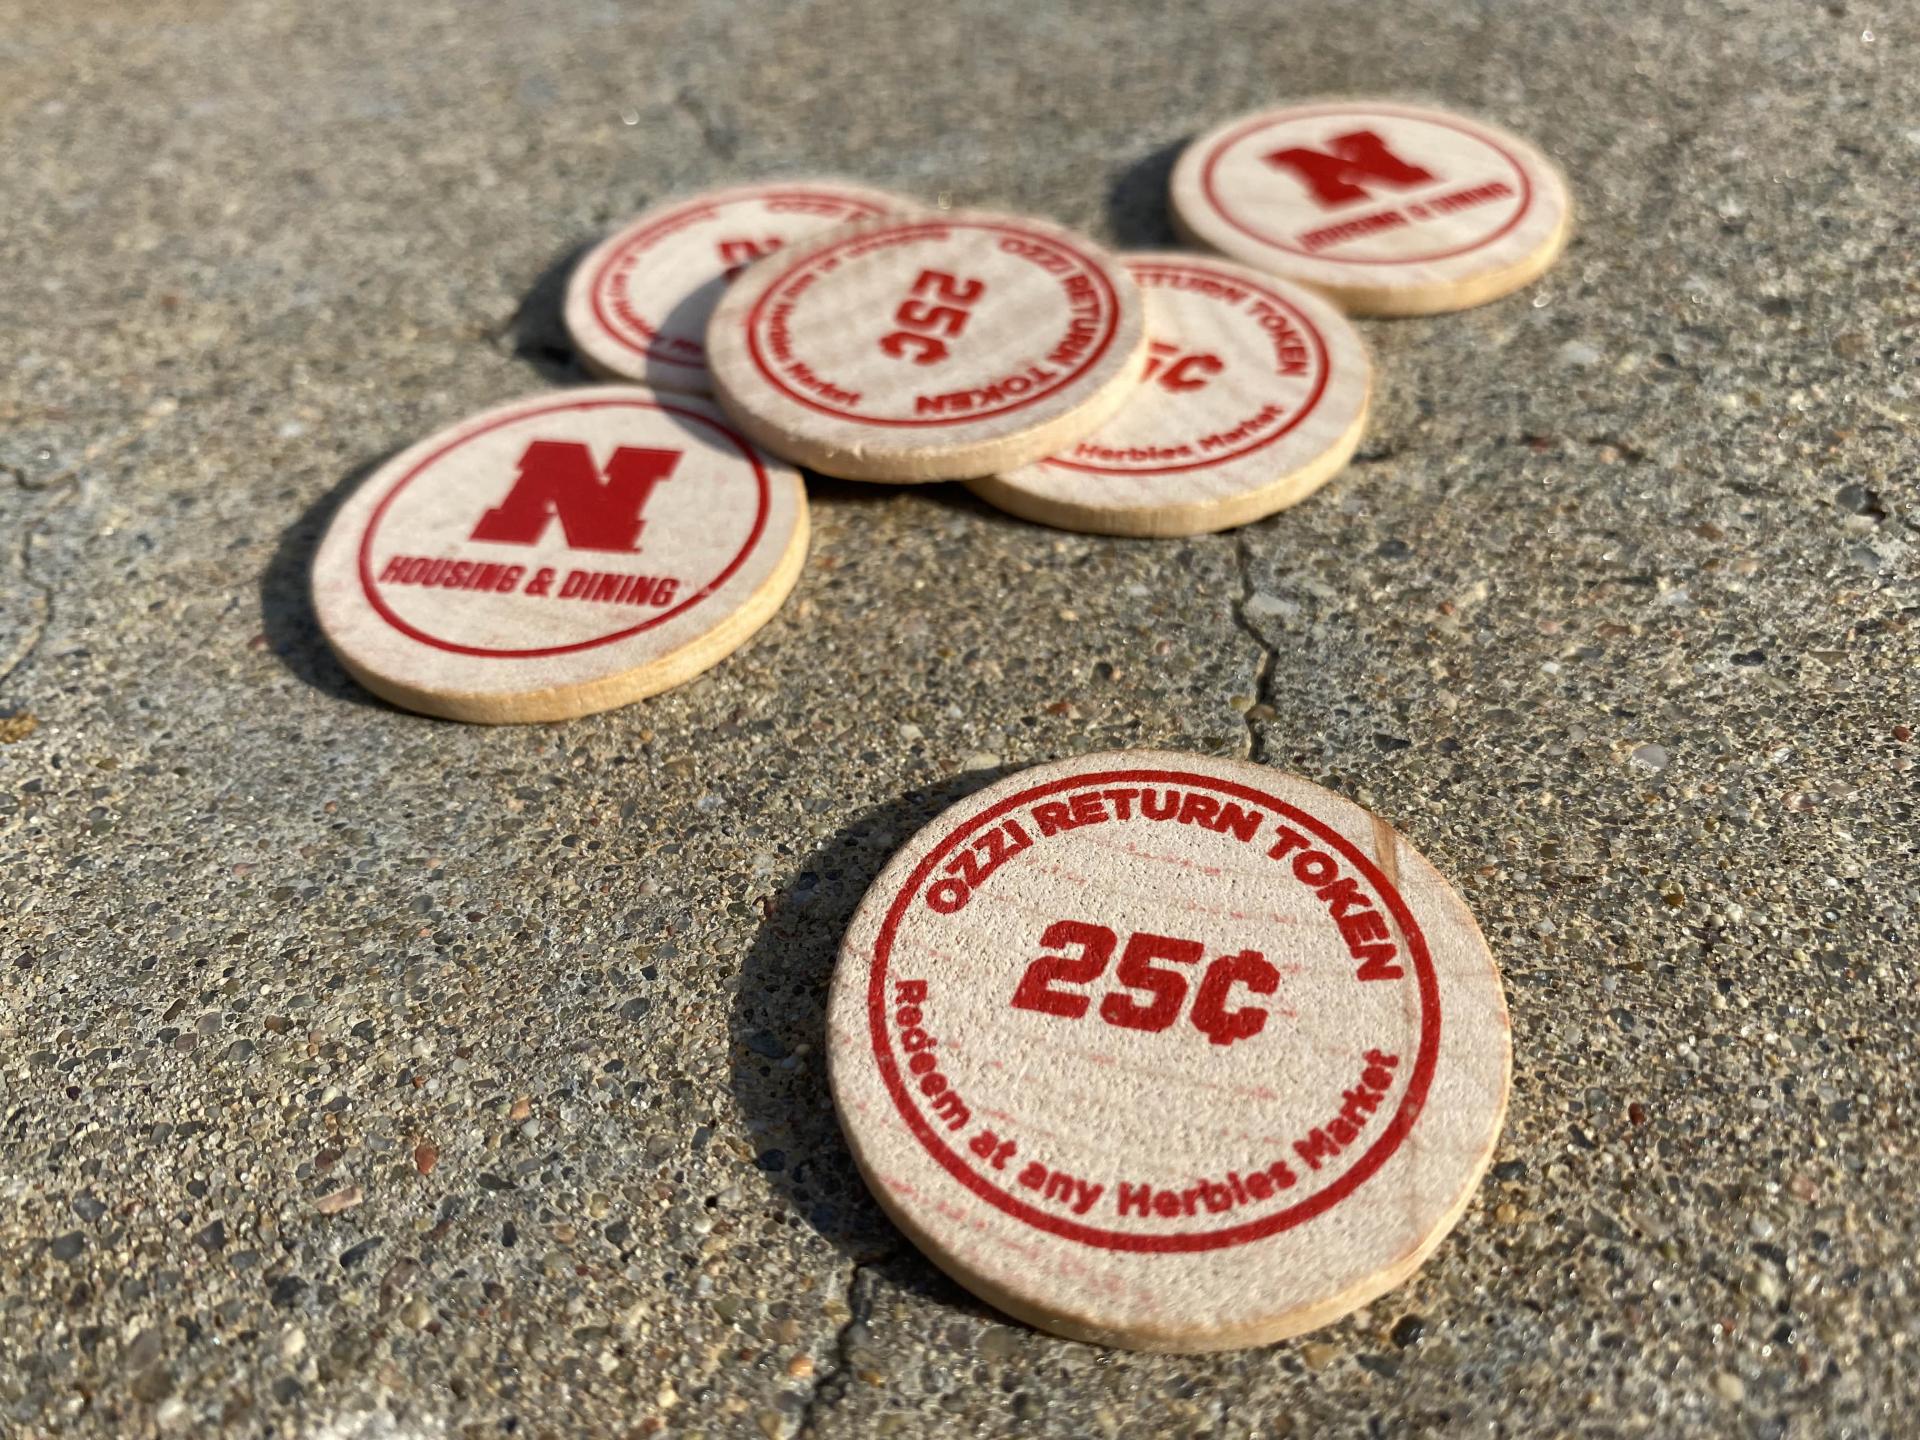 Wooden OZZI tokens lay on the cement